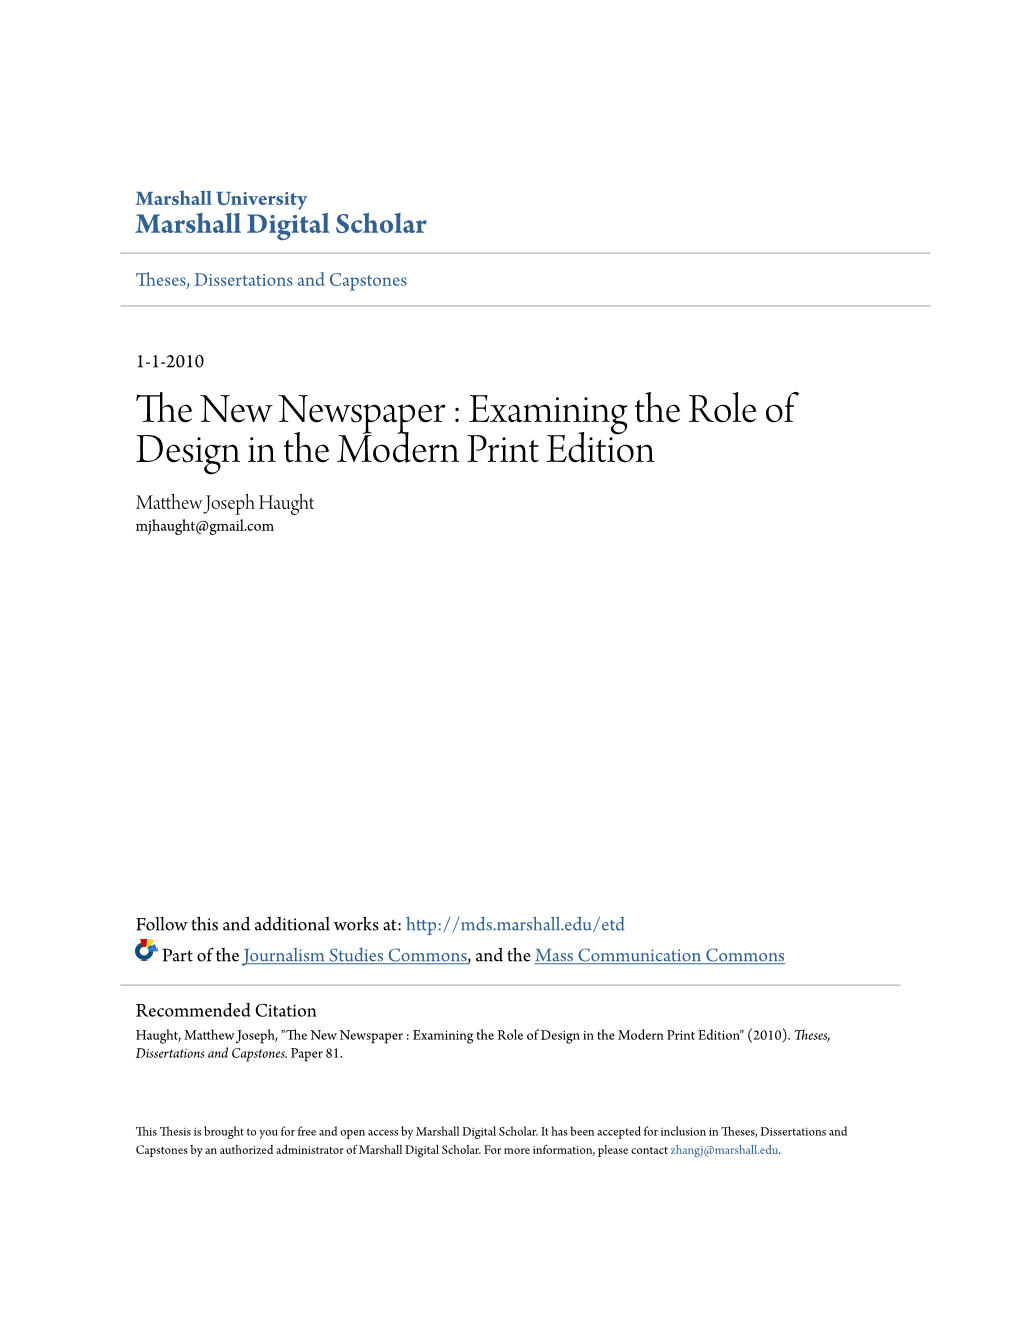 The New Newspaper: Examining the Role of Design in the Modern Print Edition